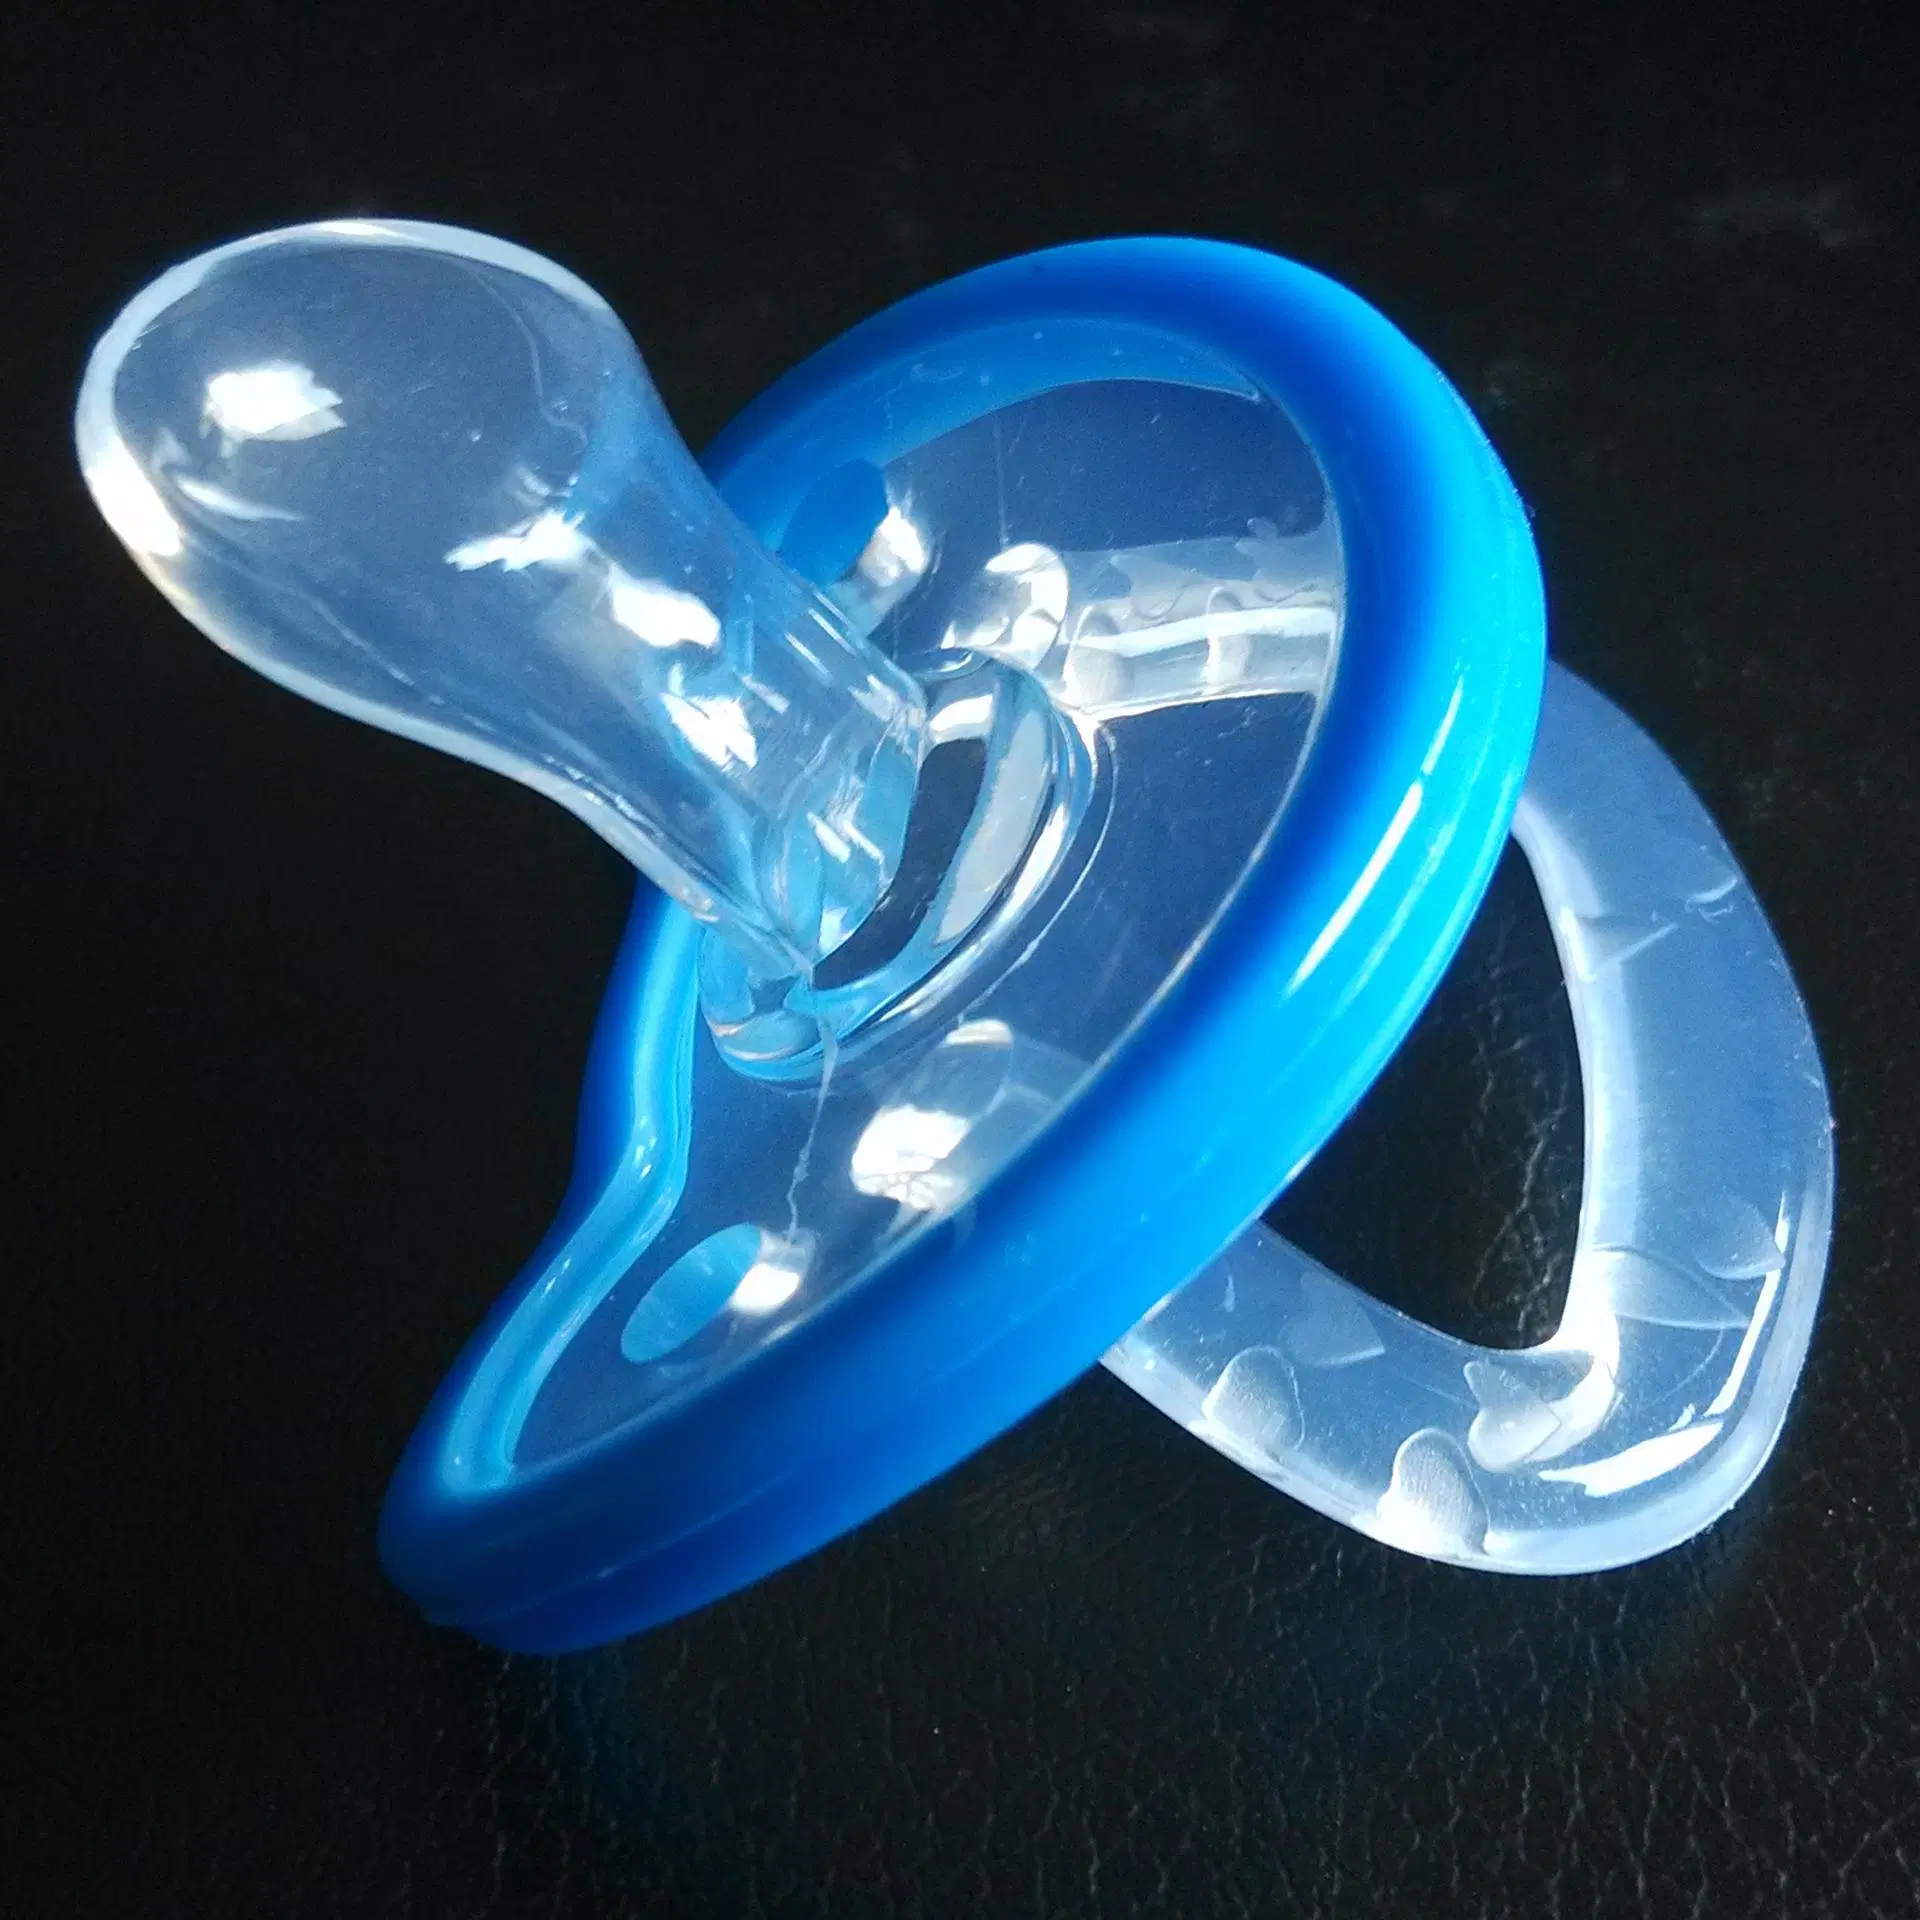 China Factory of LSR Liquid Silicone Rubber for Manufacturing Baby Pacifiers Baby Feeding Nipple Baby Feeding Bottle Baby Soother